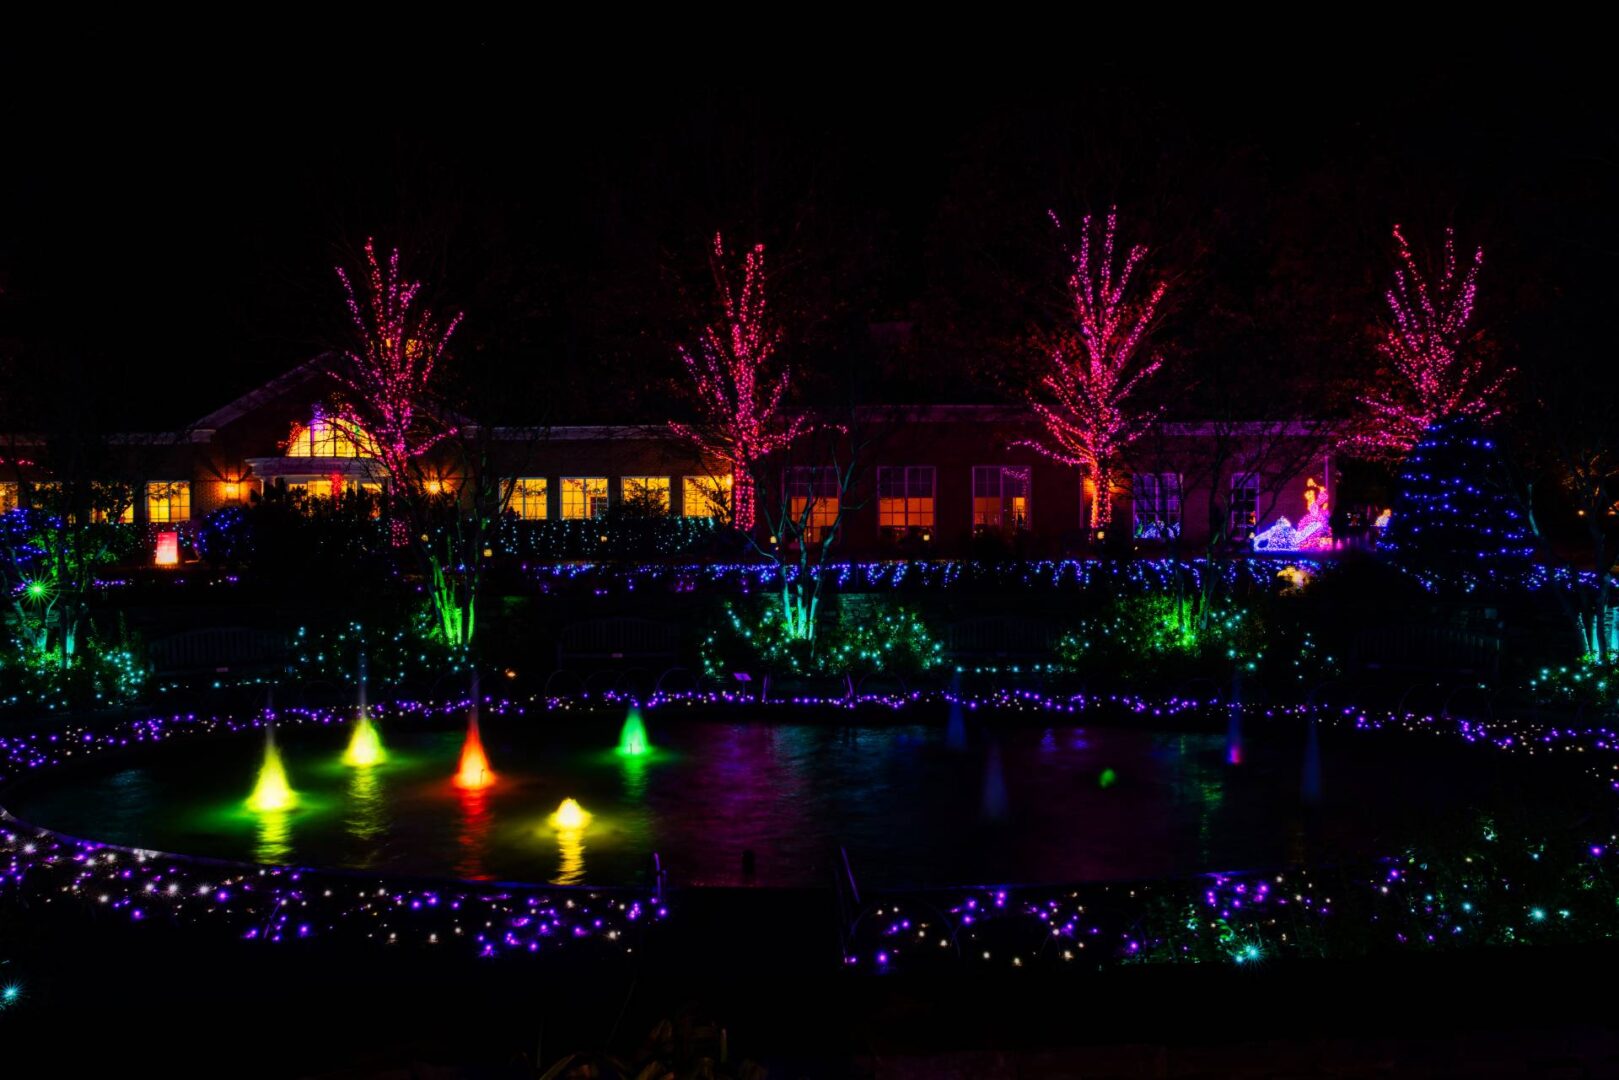 A pond with lights in the middle of it